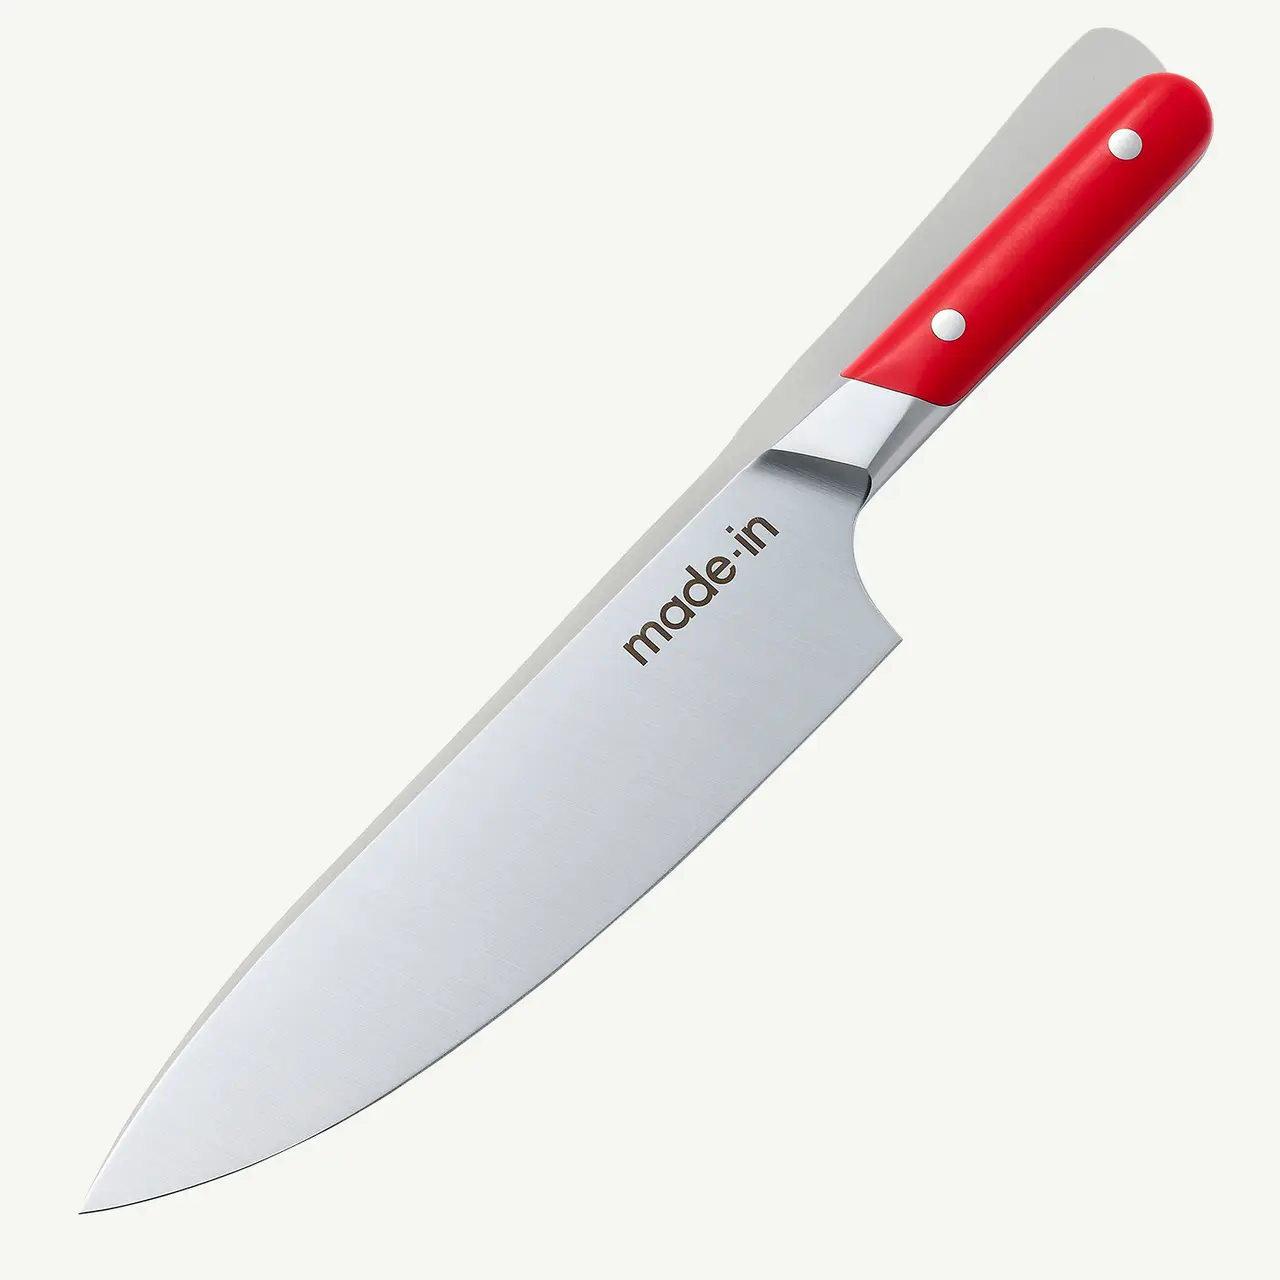 A chef's knife with a red handle and a silver blade that has the text "made in" imprinted on it, displayed against a white background.